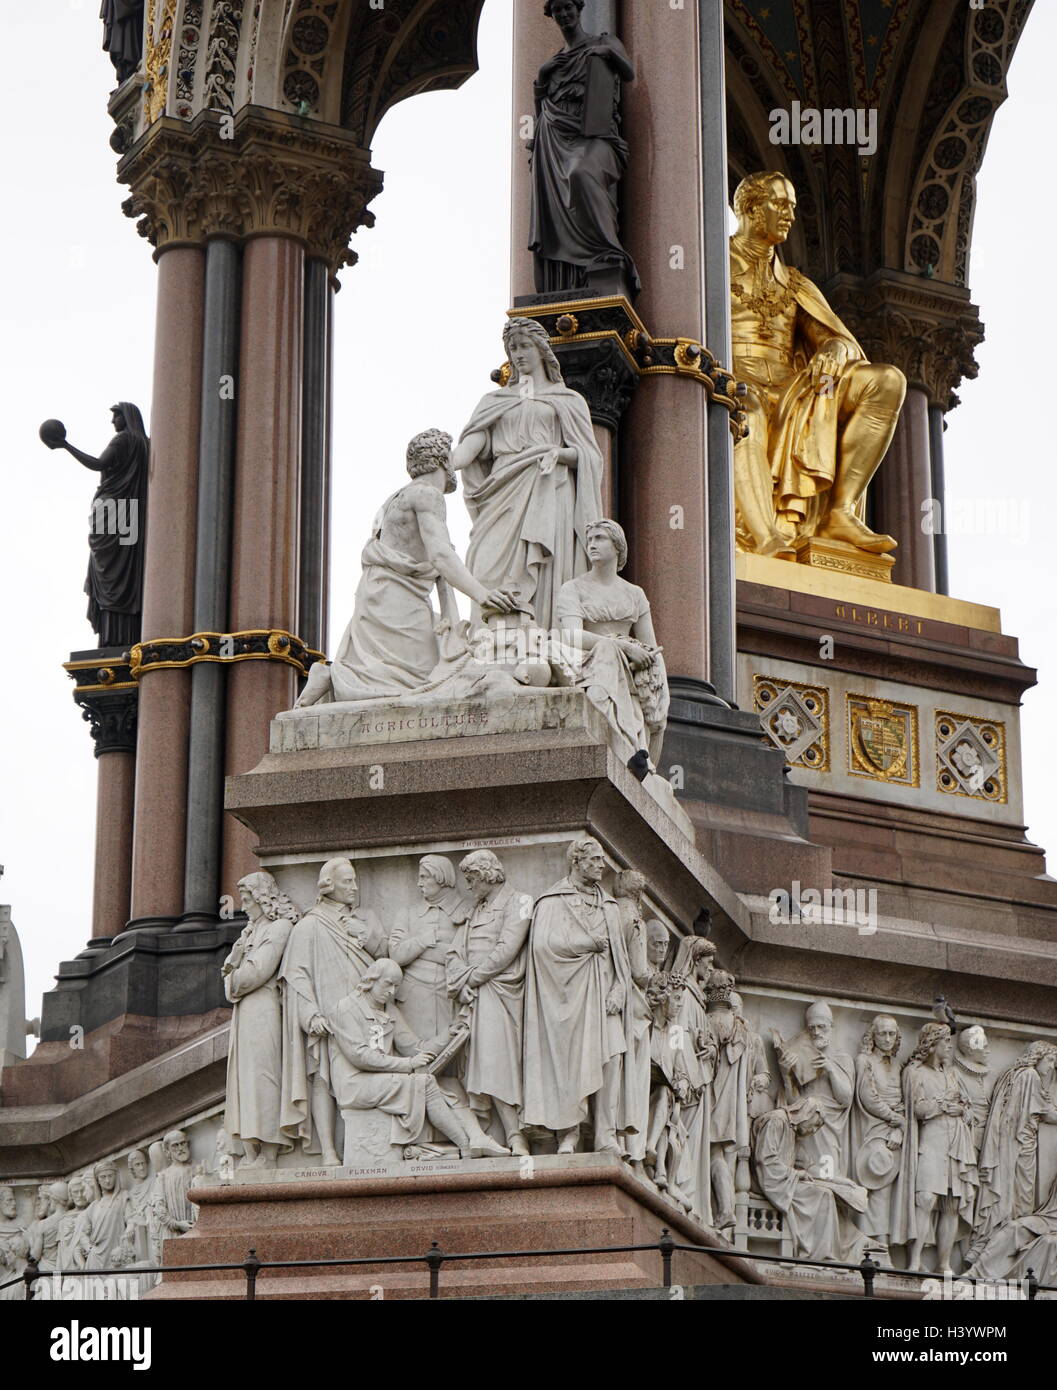 The Albert Memorial in Kensington Gardens, London. Commissioned by Queen Victoria in memory of her beloved husband, Prince Albert who died of typhoid in 1861. The memorial was designed by Sir George Gilbert Scott in the Gothic Revival style. Opened in July 1872 by Queen Victoria. Stock Photo